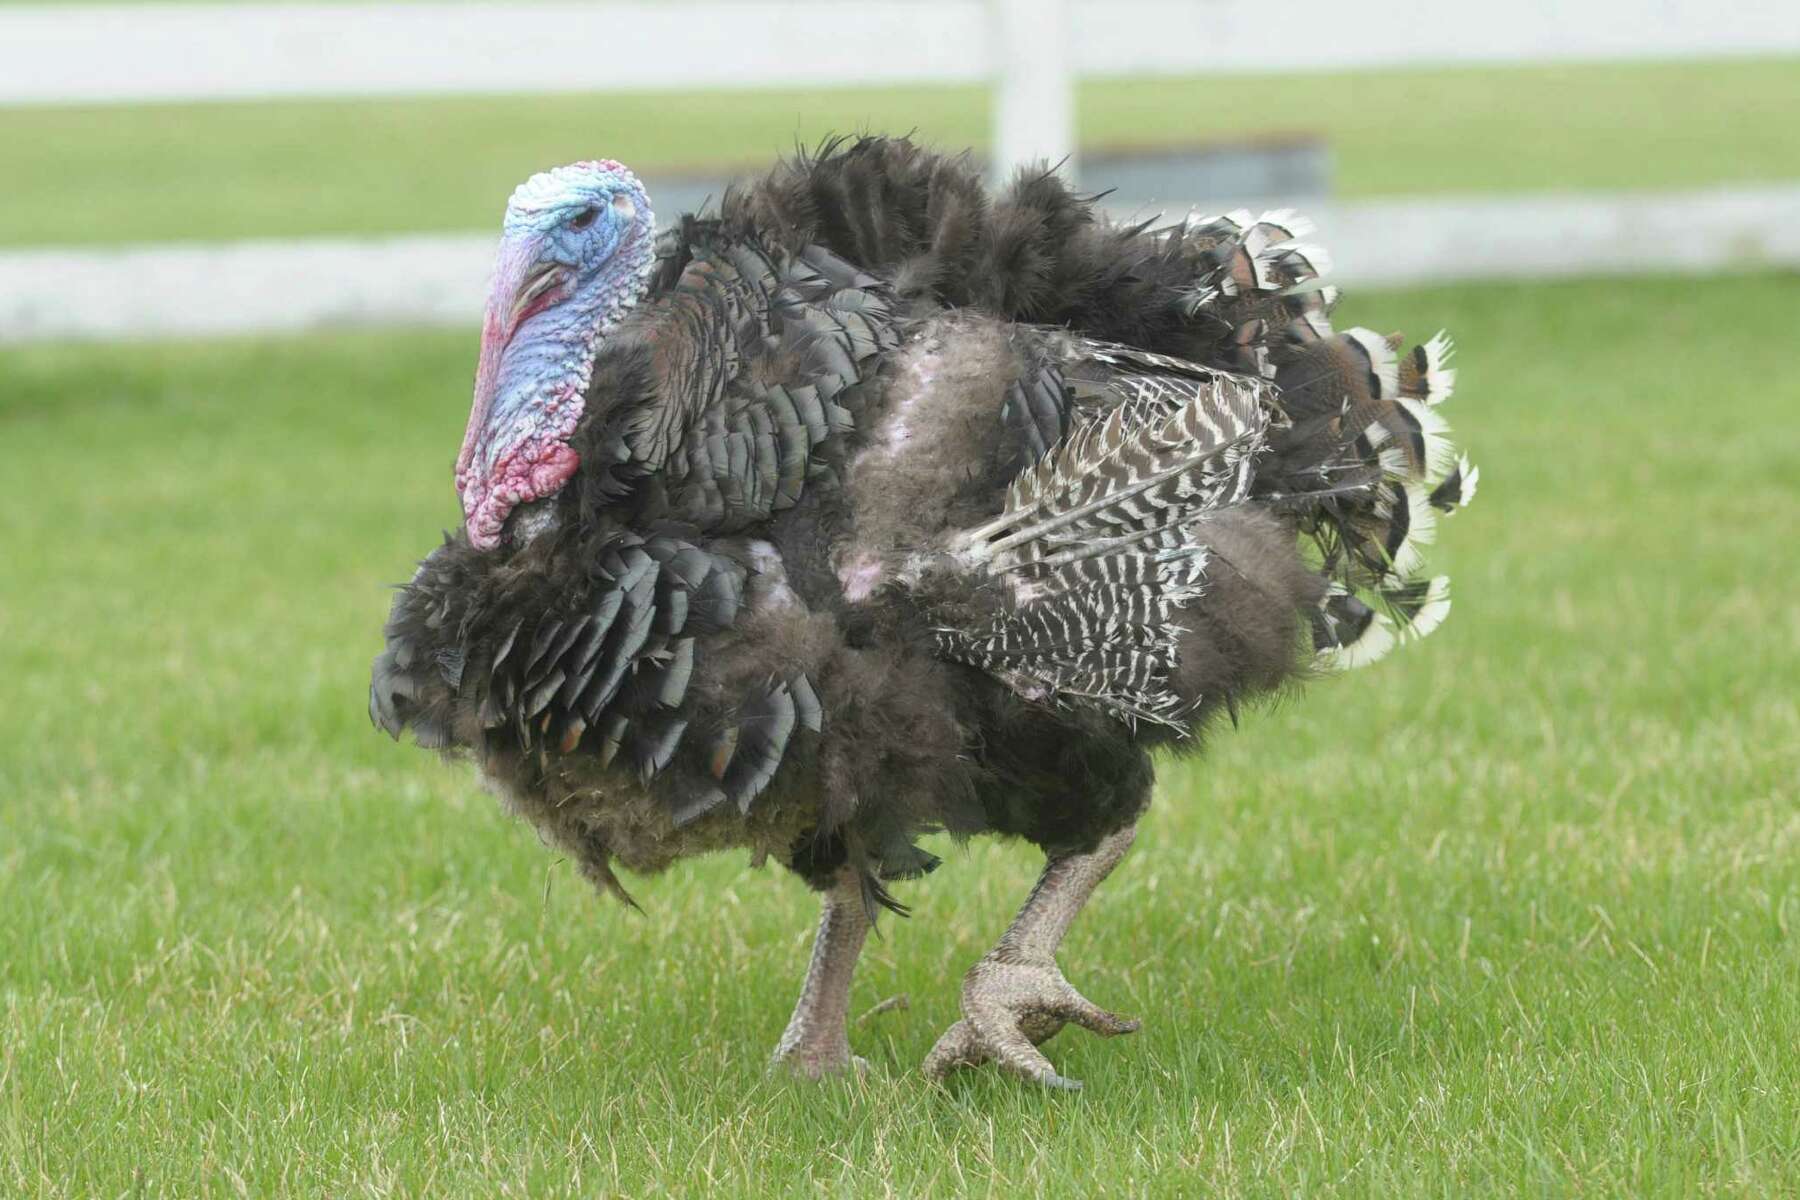 pop-up turkey timer Archives - California Agriculture News Today